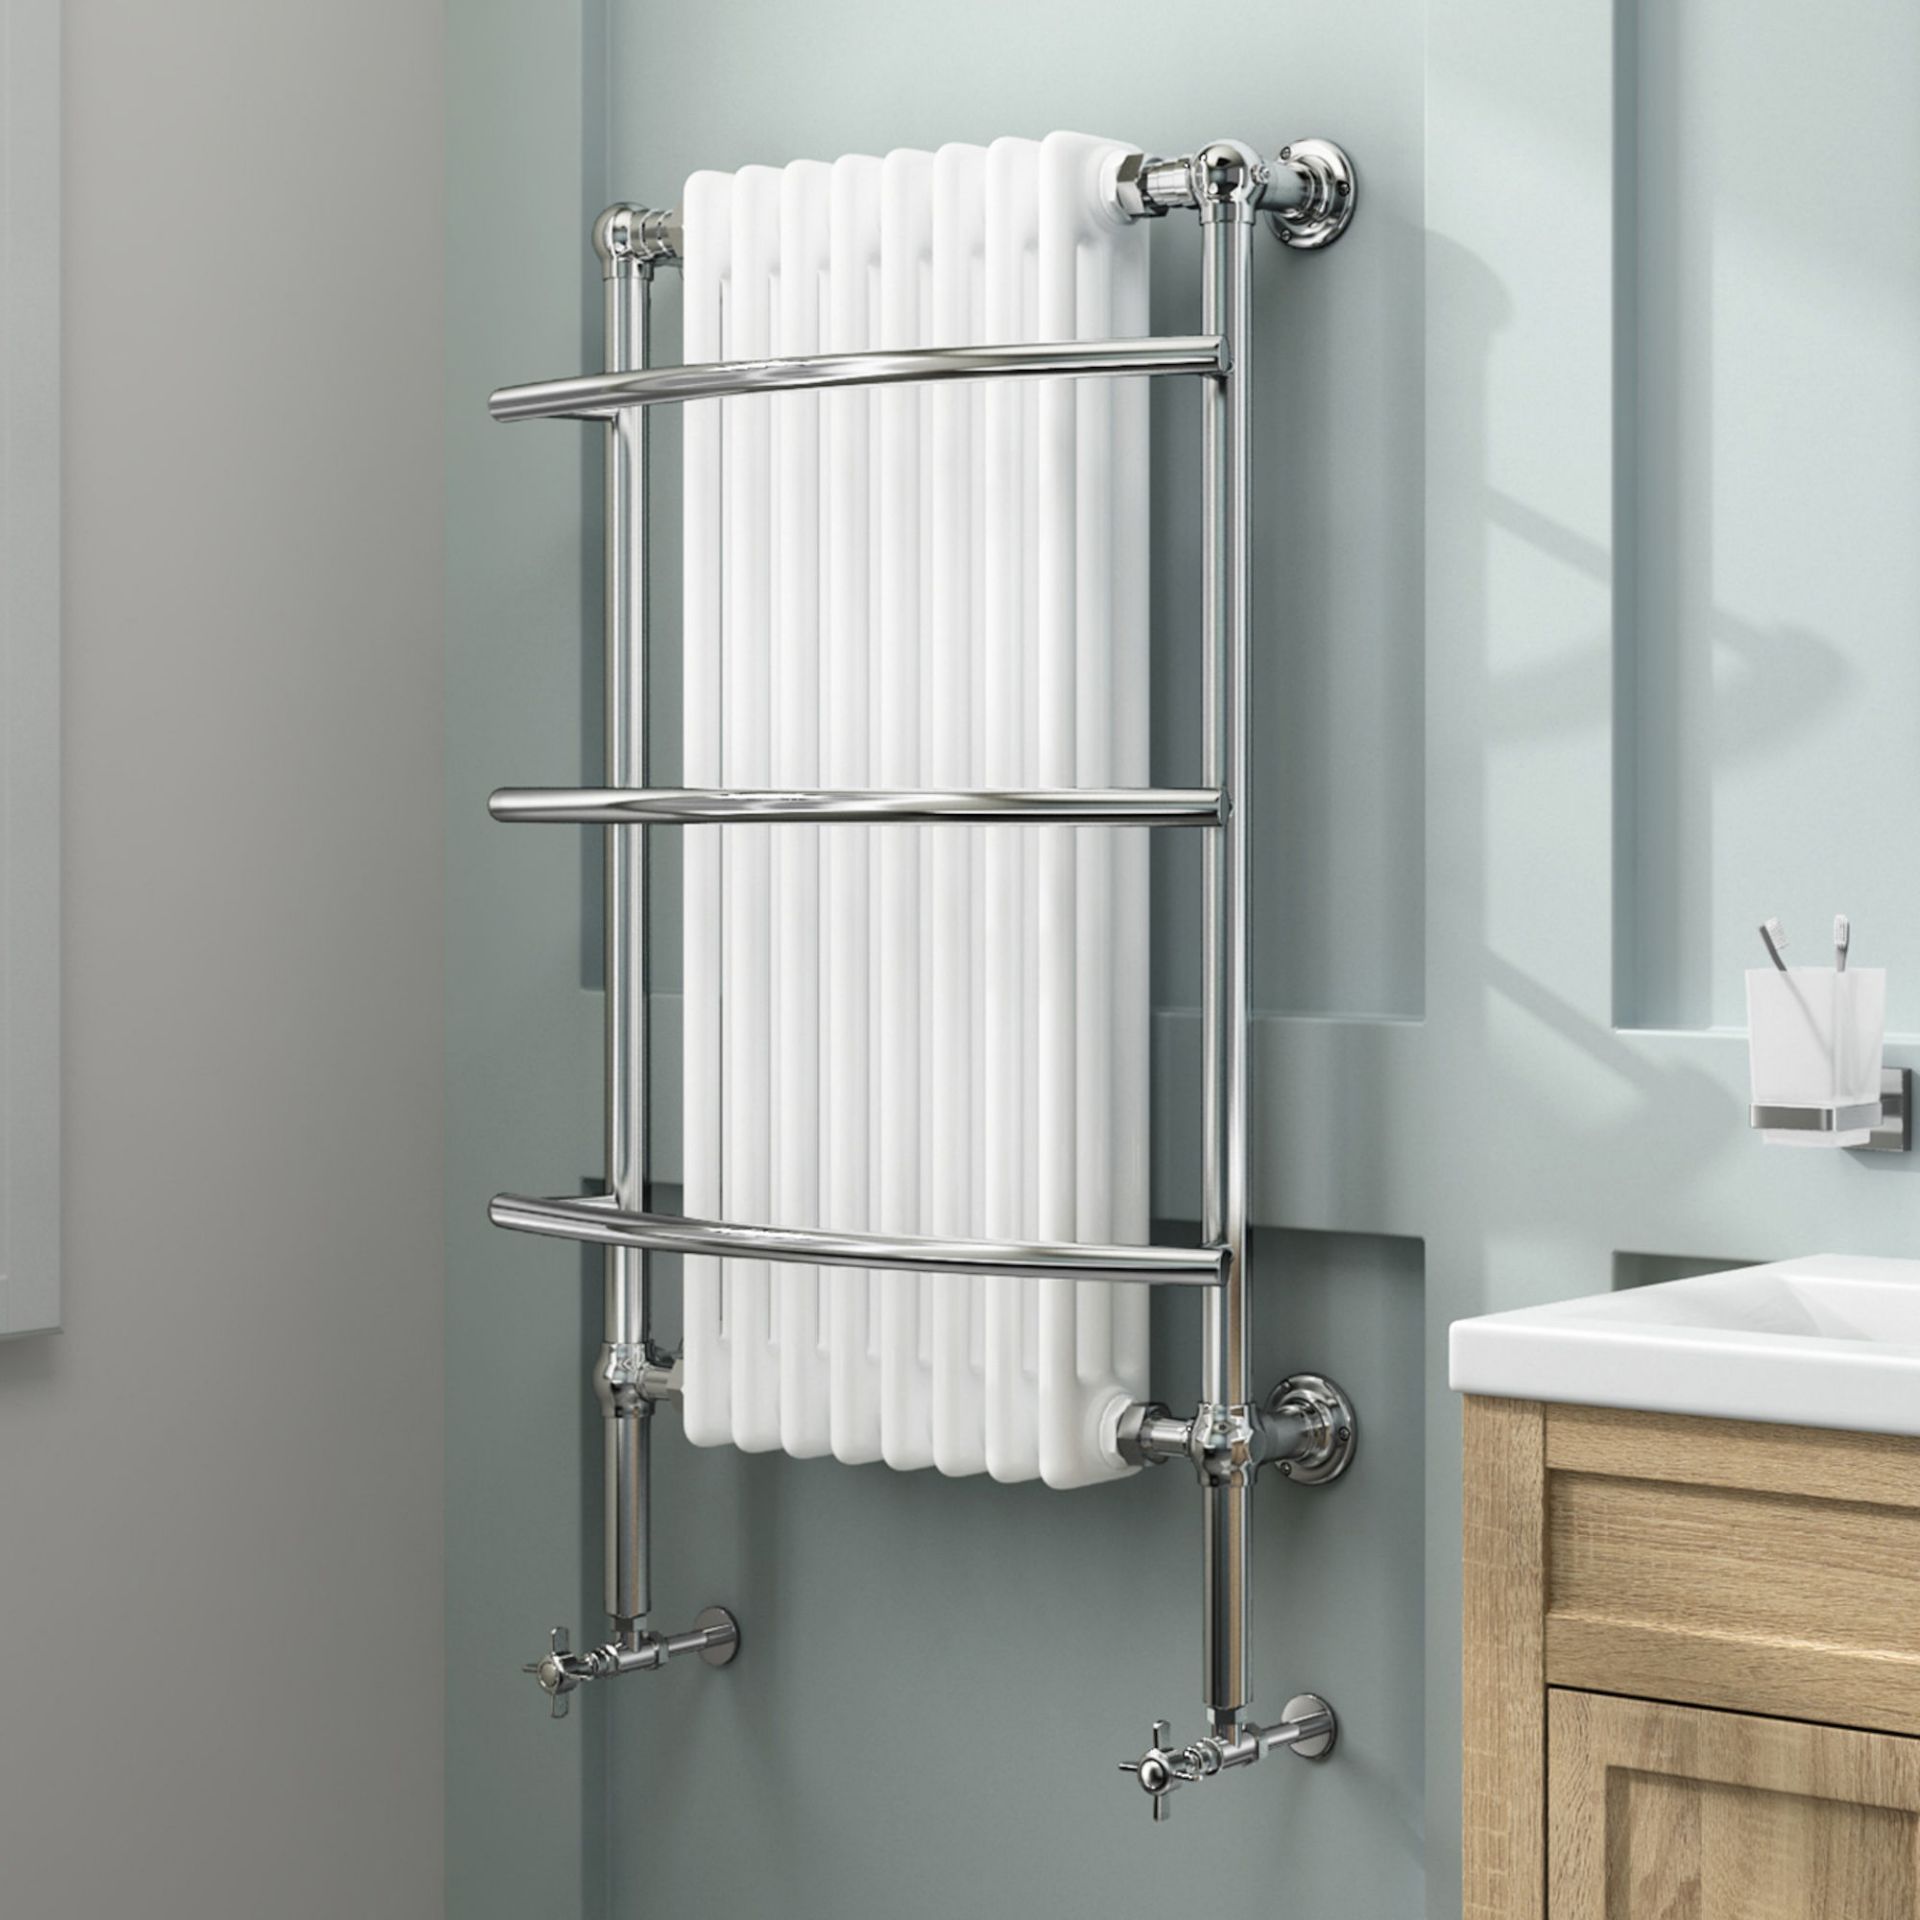 (CP17) 1000x635mm Traditional White Wall Mounted Towel Rail Radiator - Cambridge. RRP £479.99....